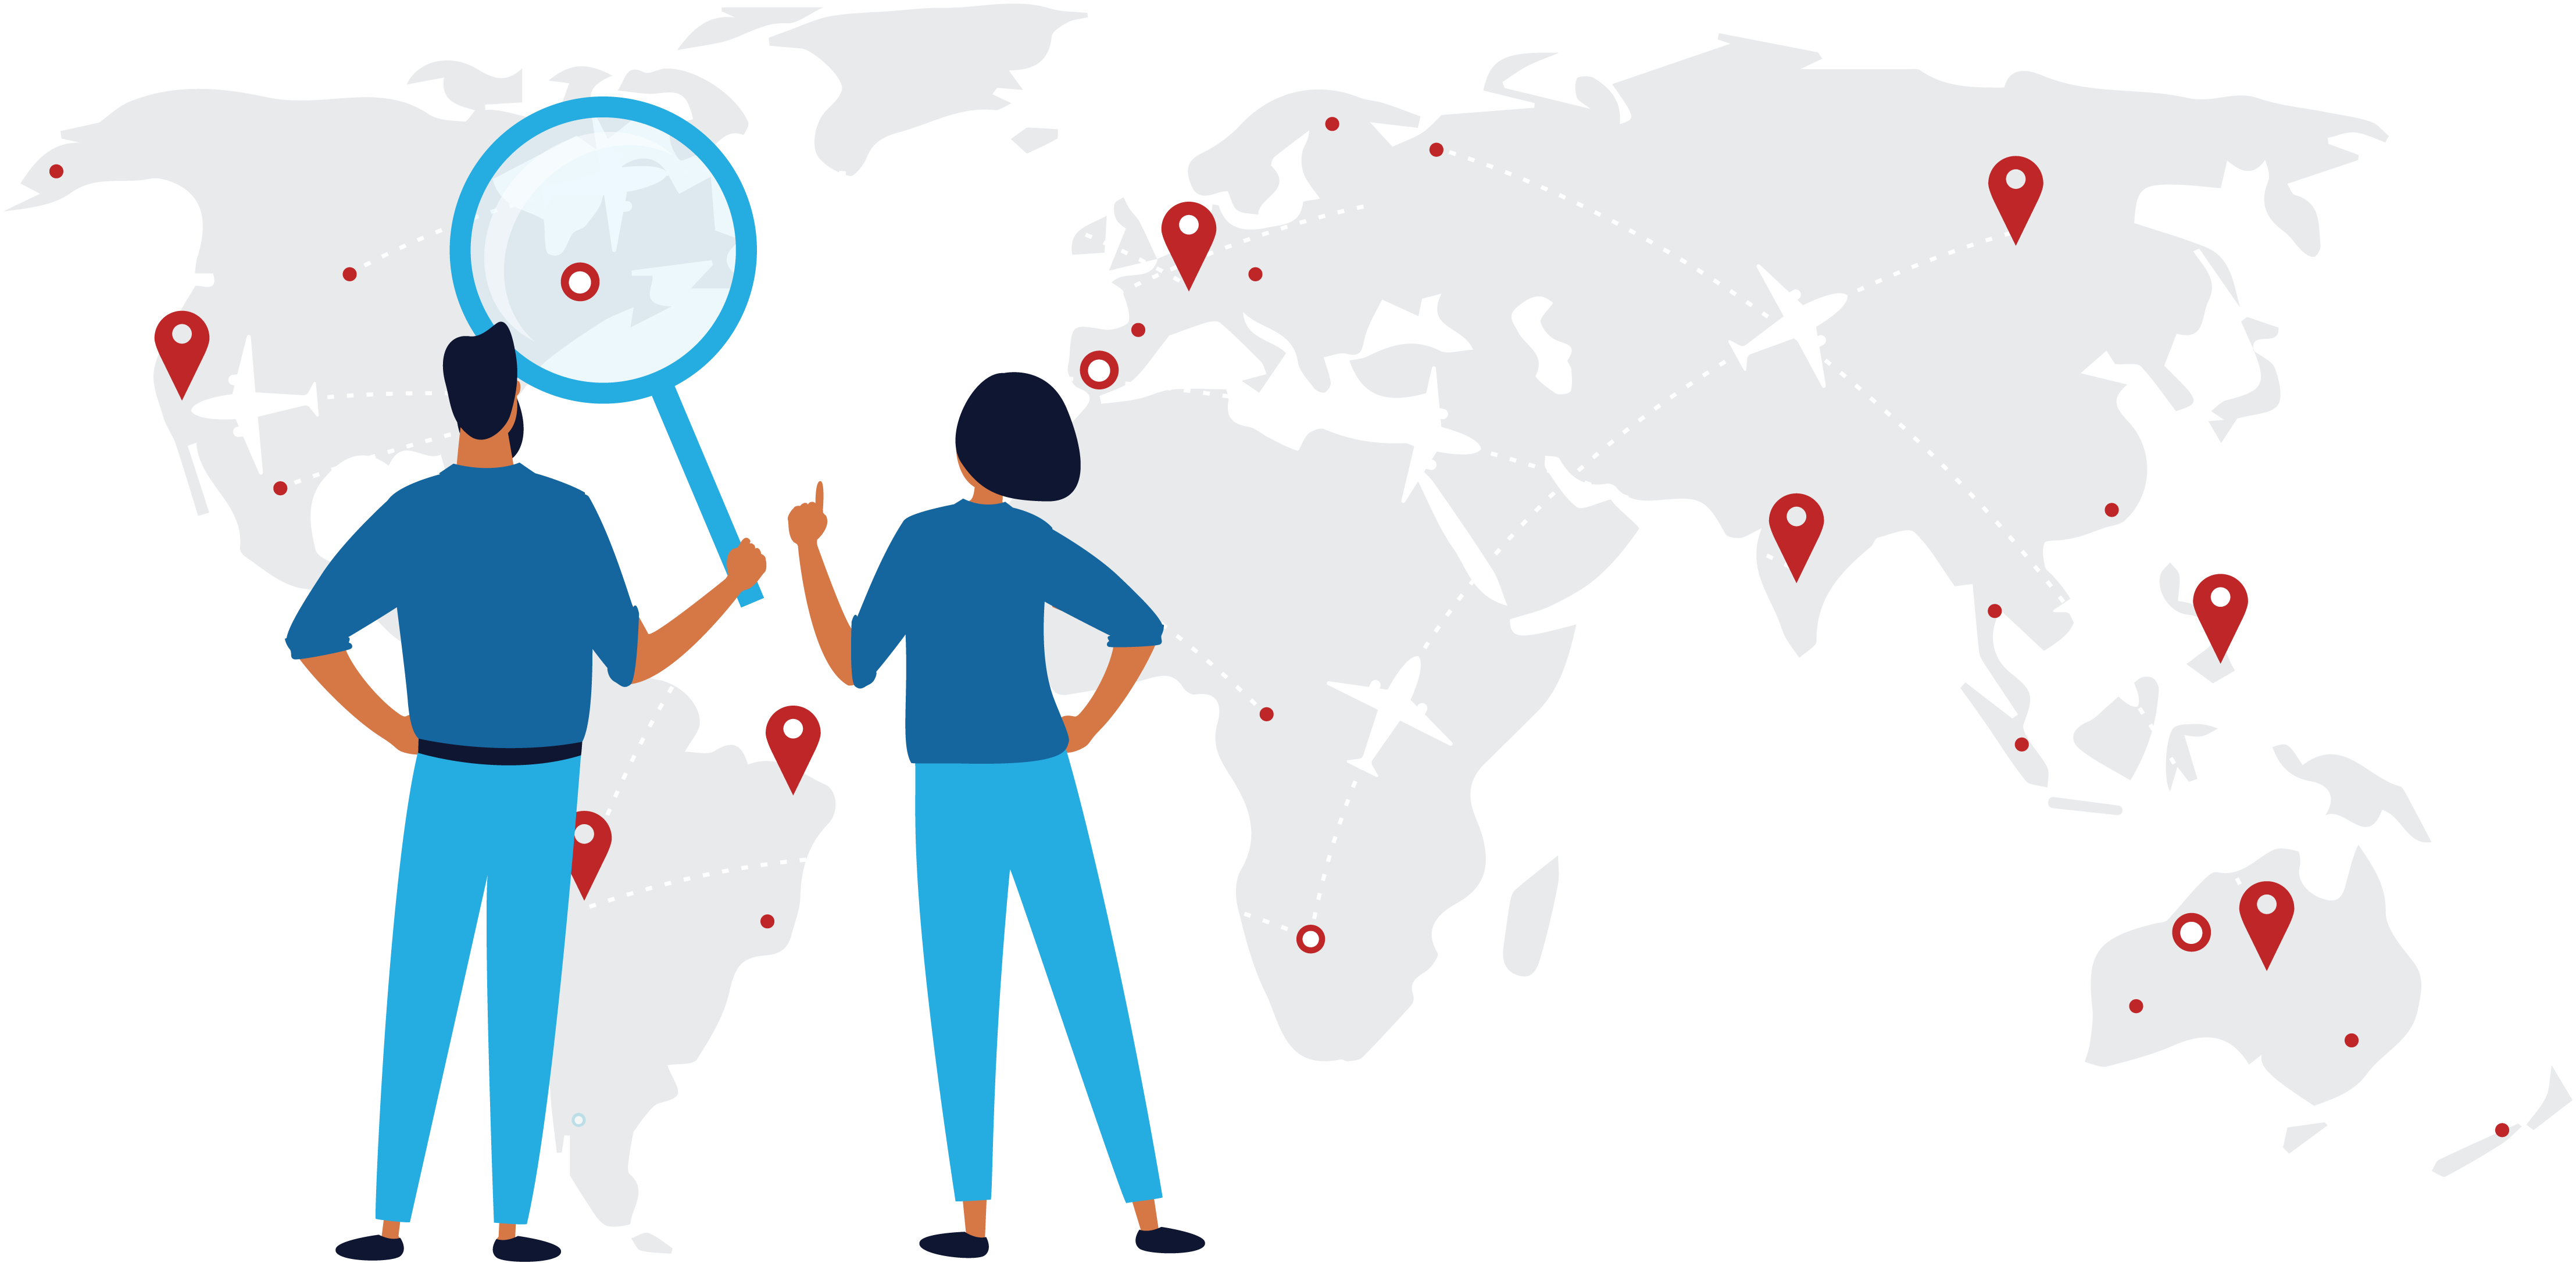 Illustration of people standing in front of a map with plotted points